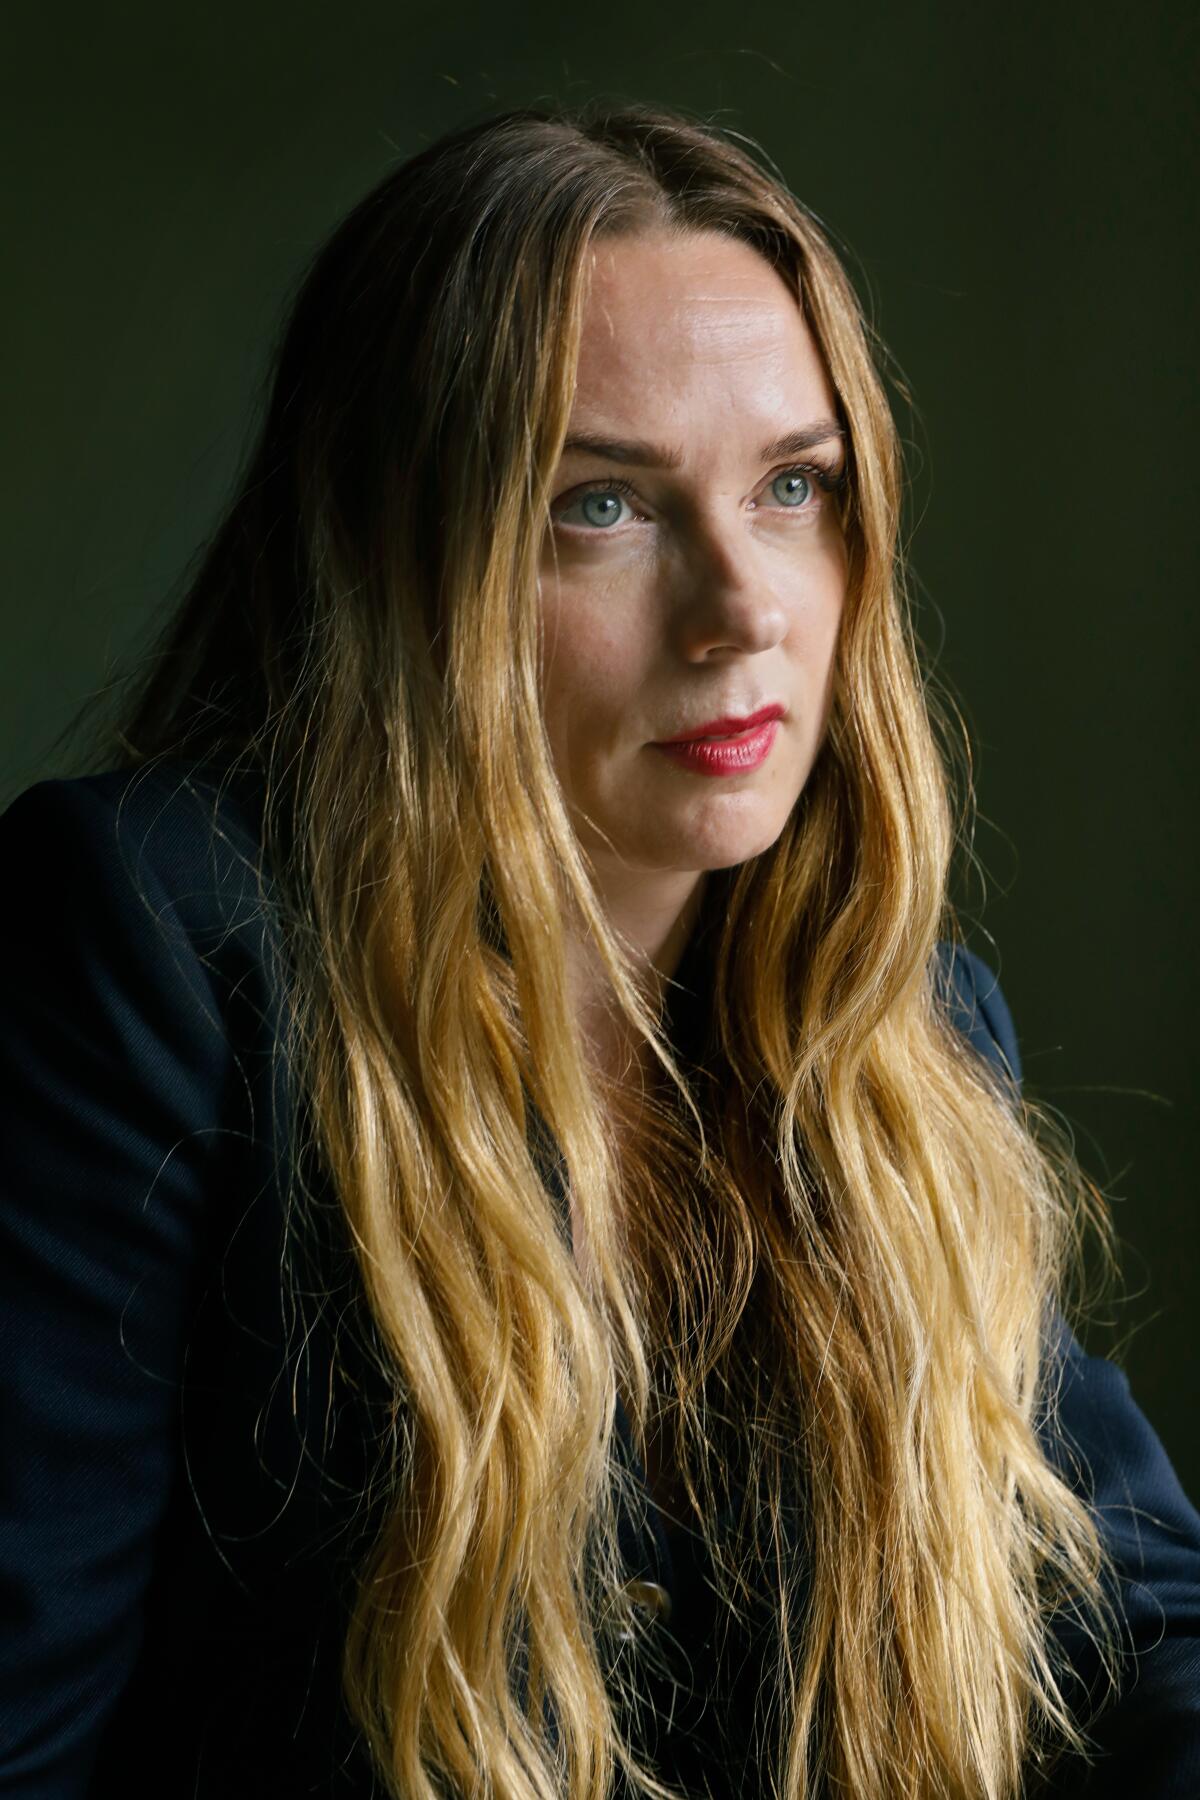 A close-up portrait of Kerry Condon with her long hair draping down her shoulders.